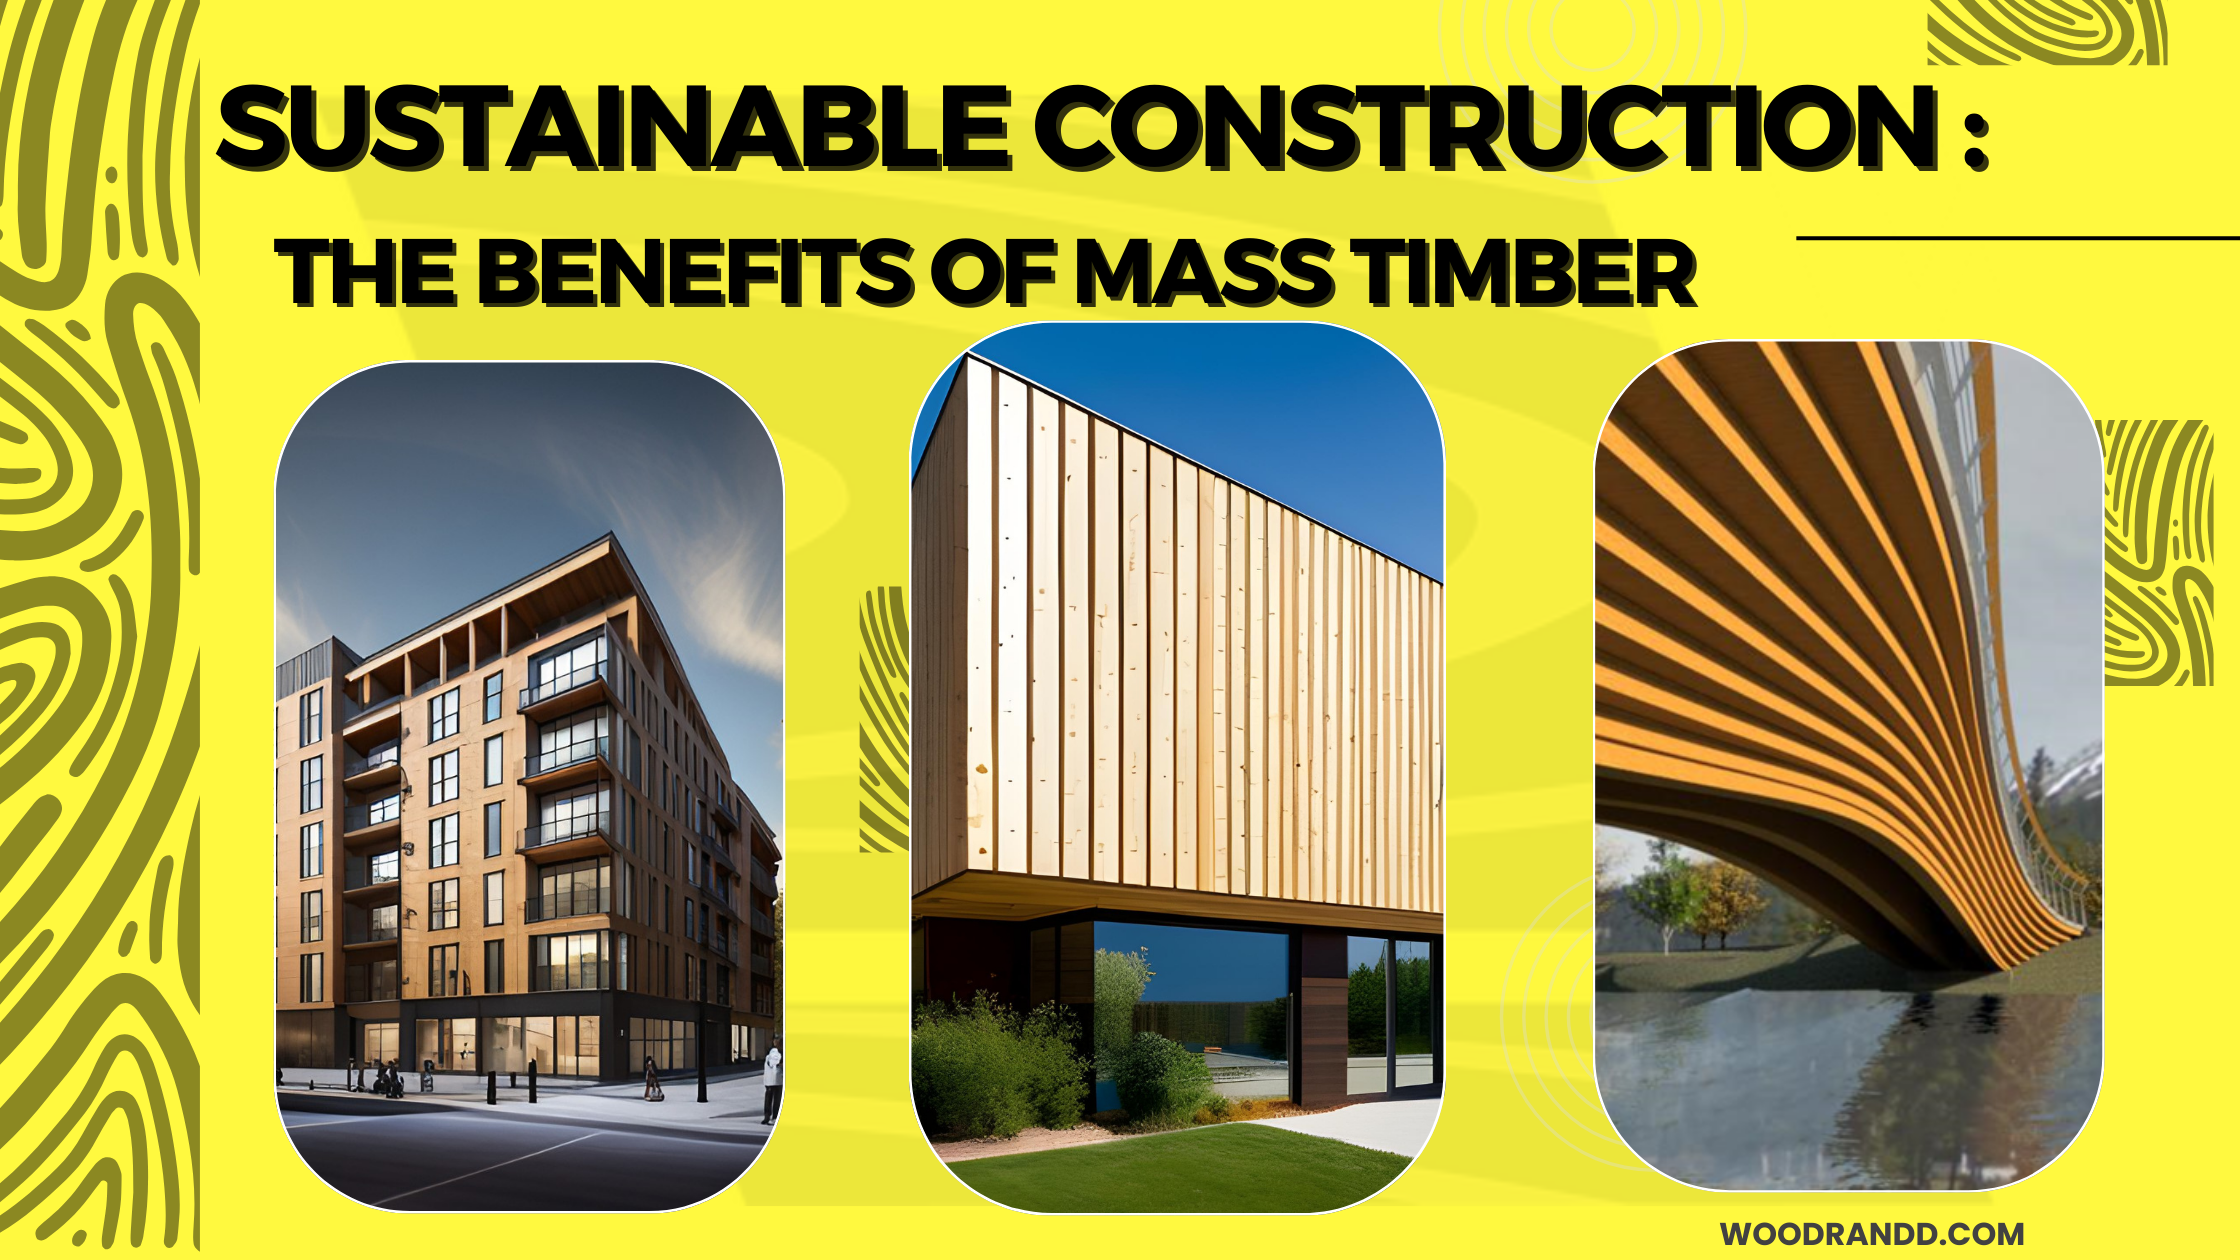 Sustainable Construction: The Benefits of Mass Timber blog post